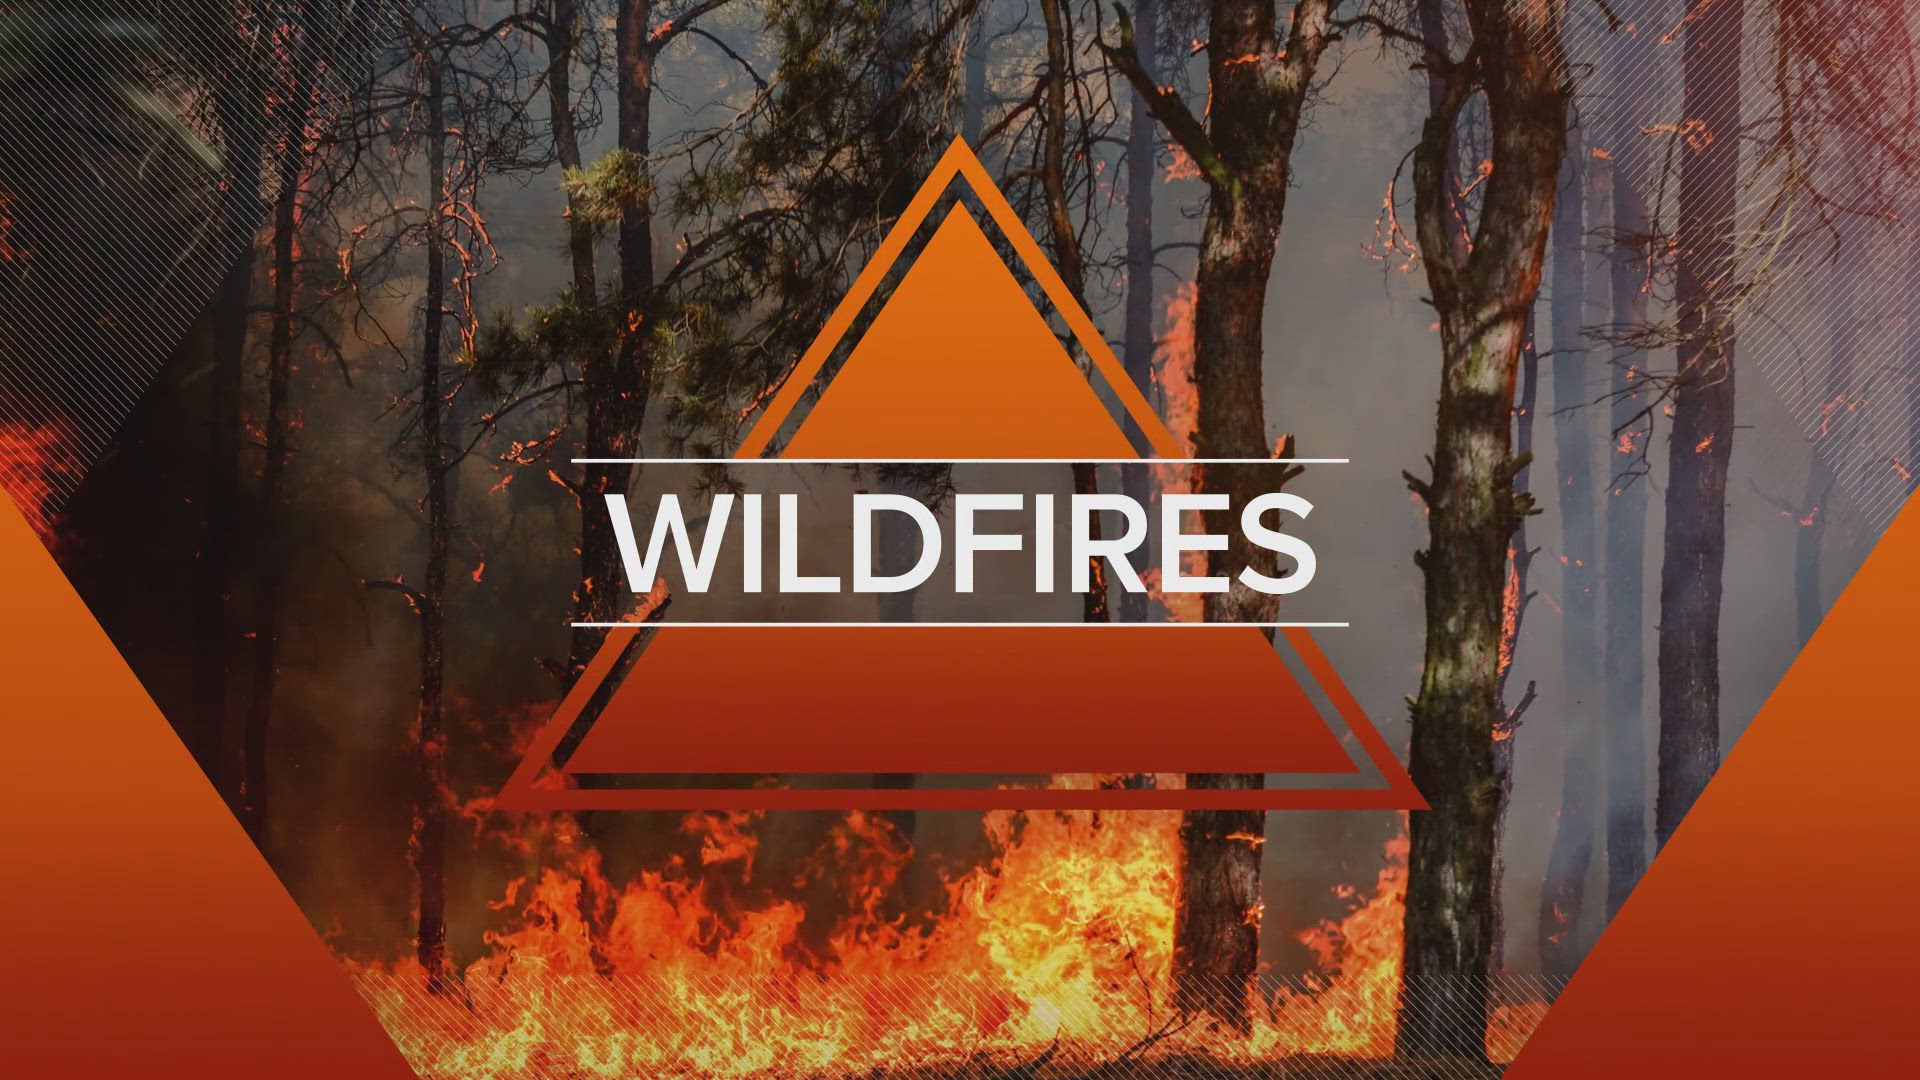 12News brings you the latest on wildfires in Arizona, including the Boulder View Fire near Scottsdale and Bunker Fire near Sedona.